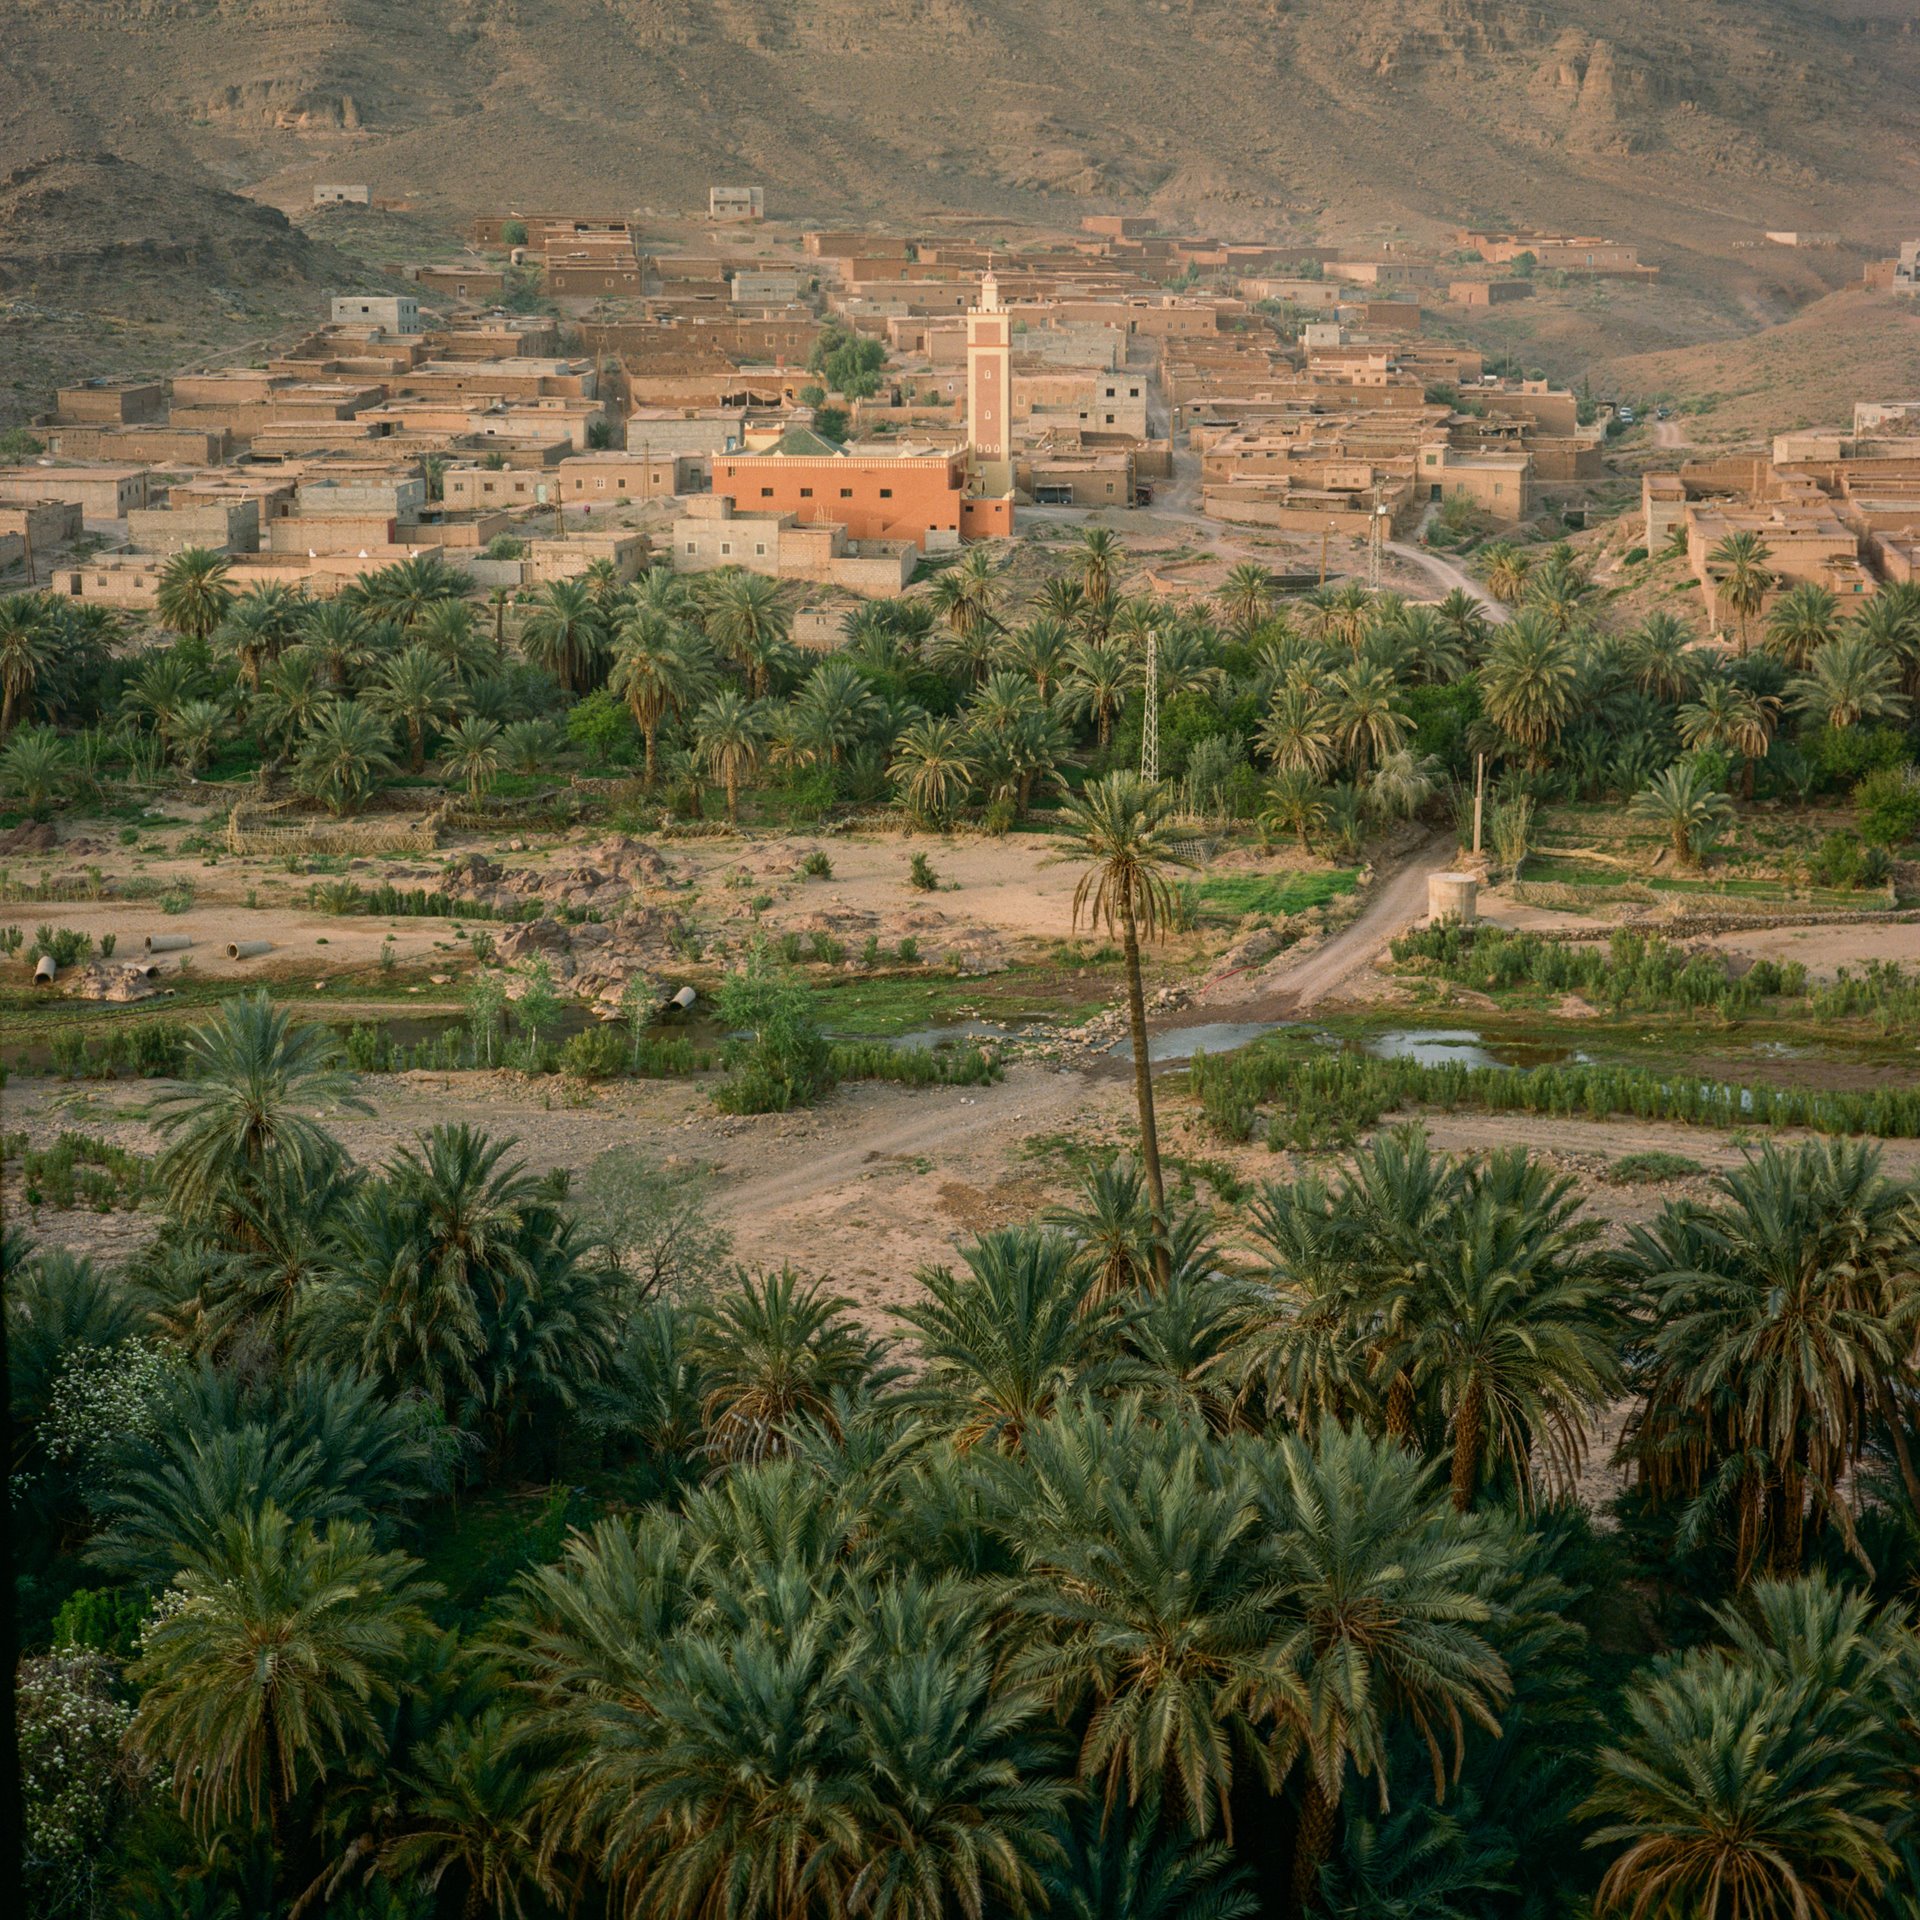 <p>The Fint Oasis, near Ouarzazate in southern Morocco, is home to around 1,500 people.</p>
